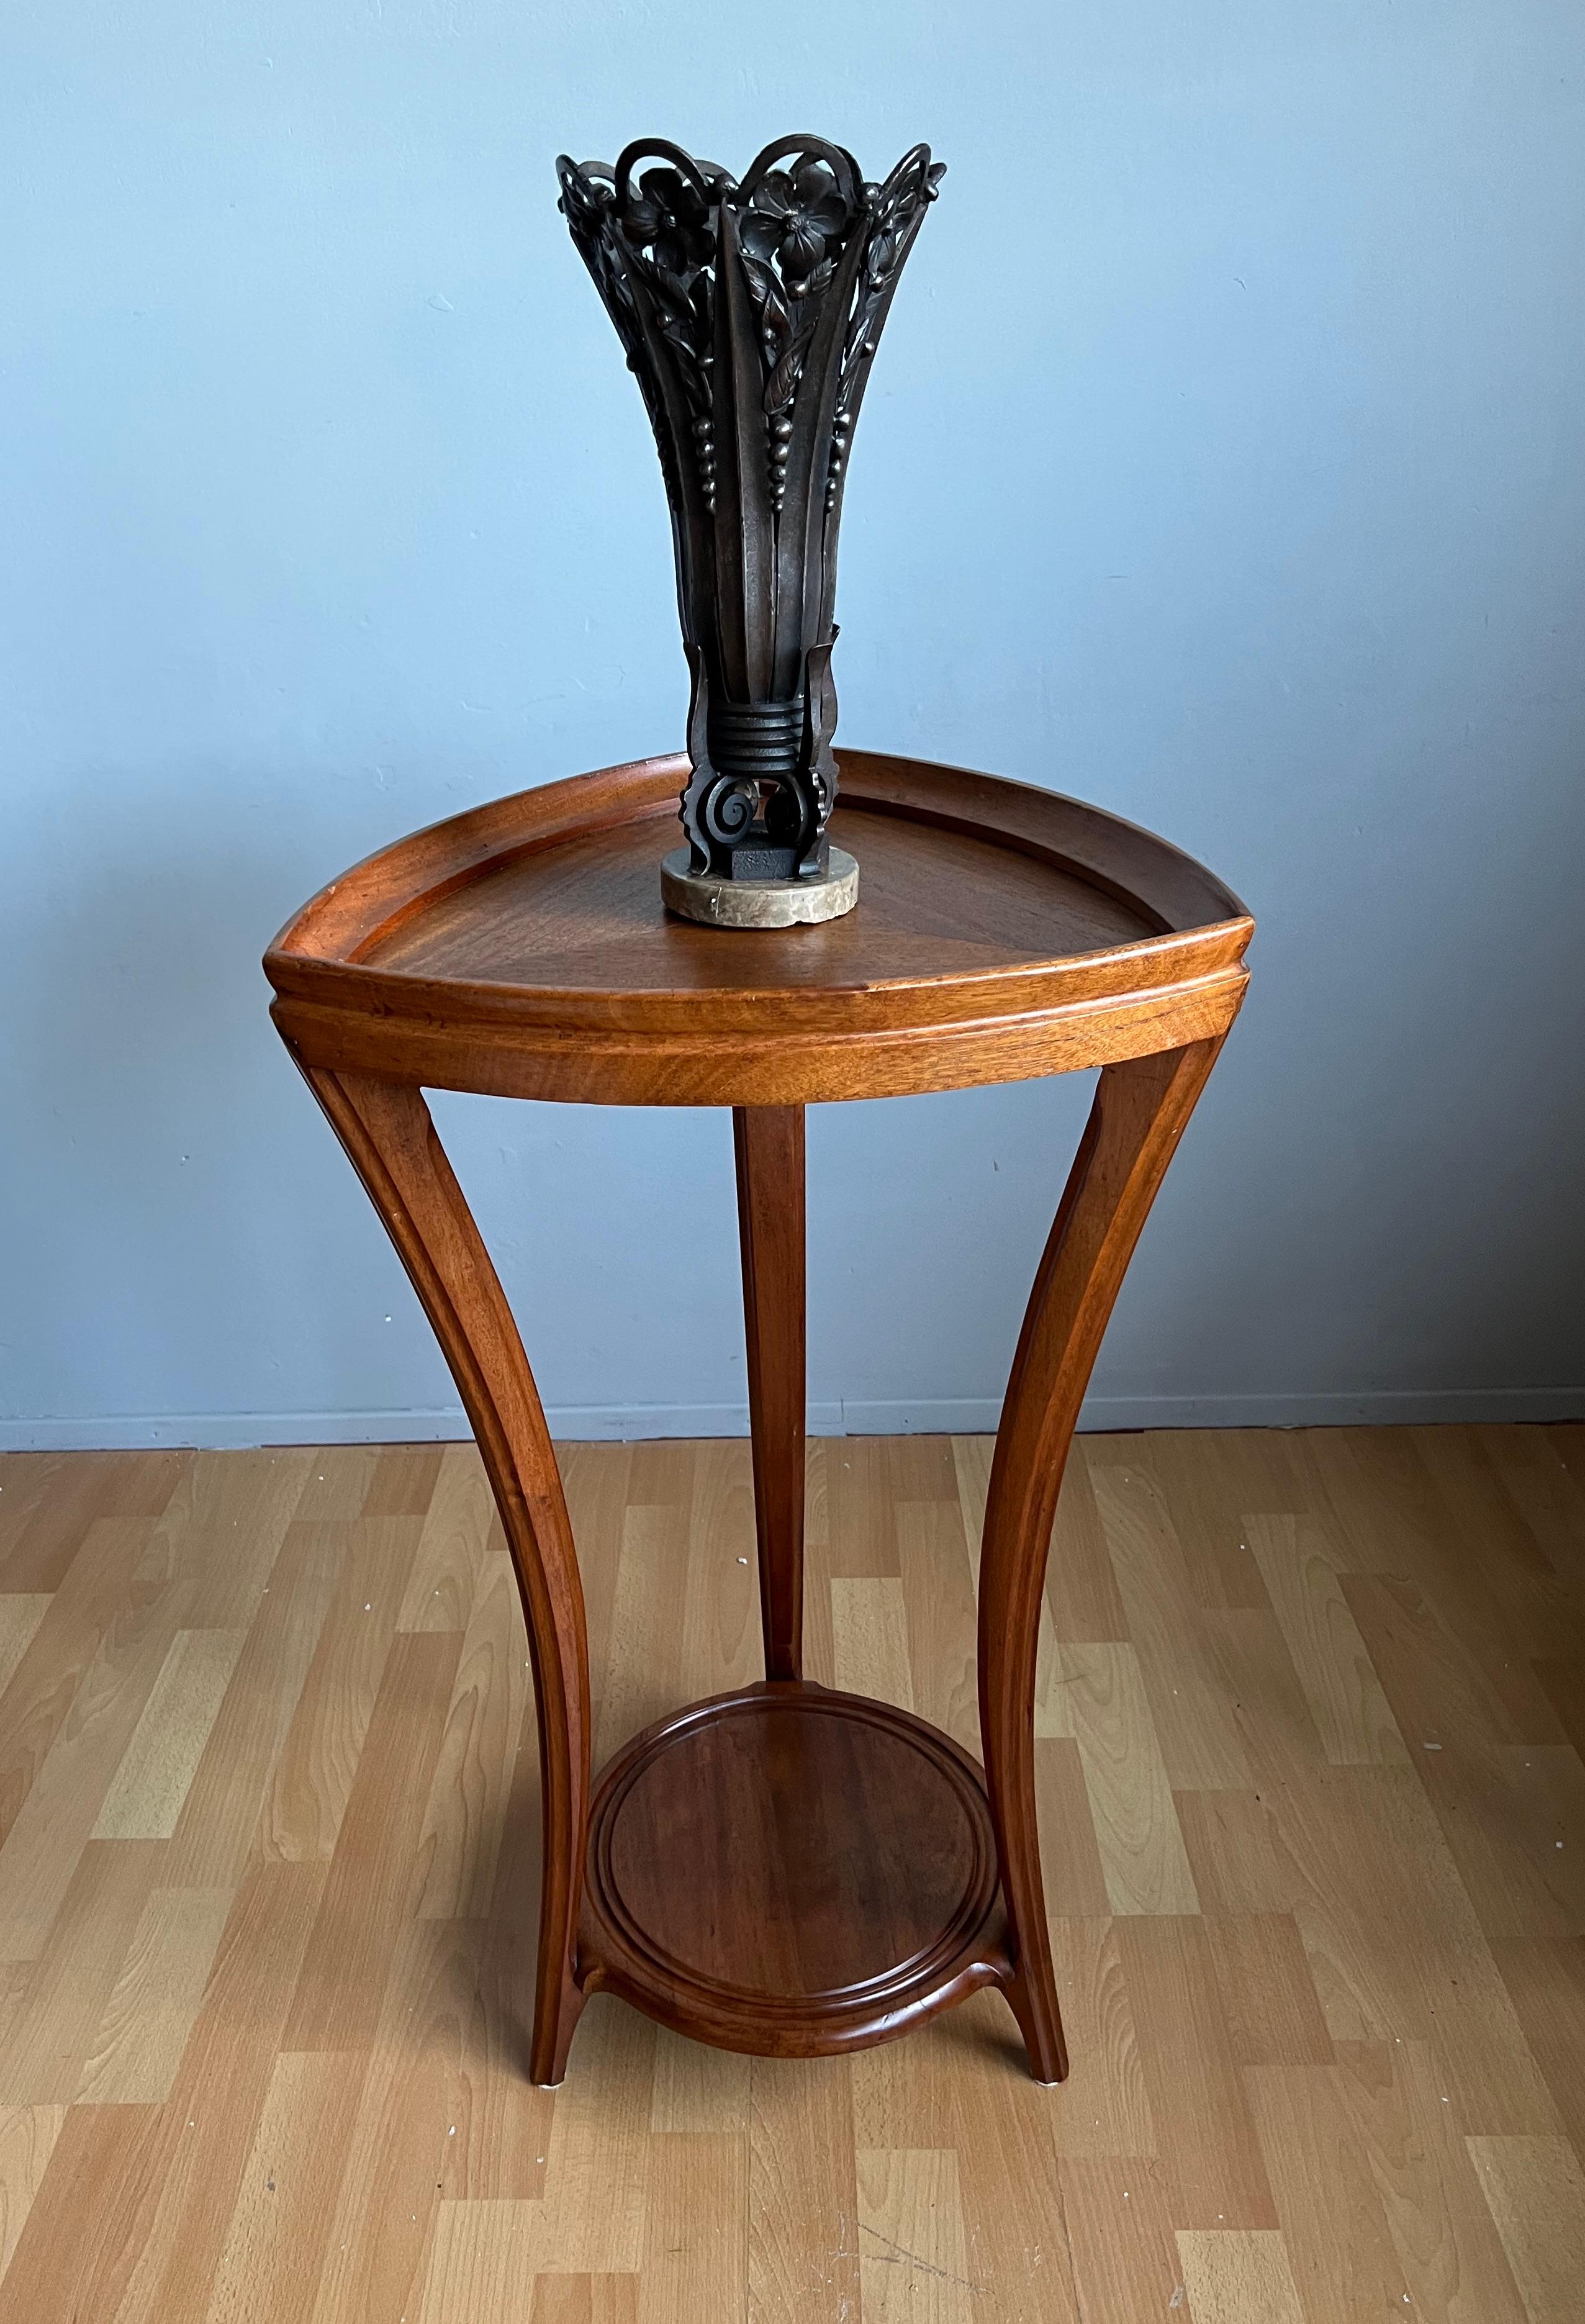 Hand-Carved Stunning Nancy Style Art Nouveau Nutwood Triangle Shape Table / Plant Stand 1900